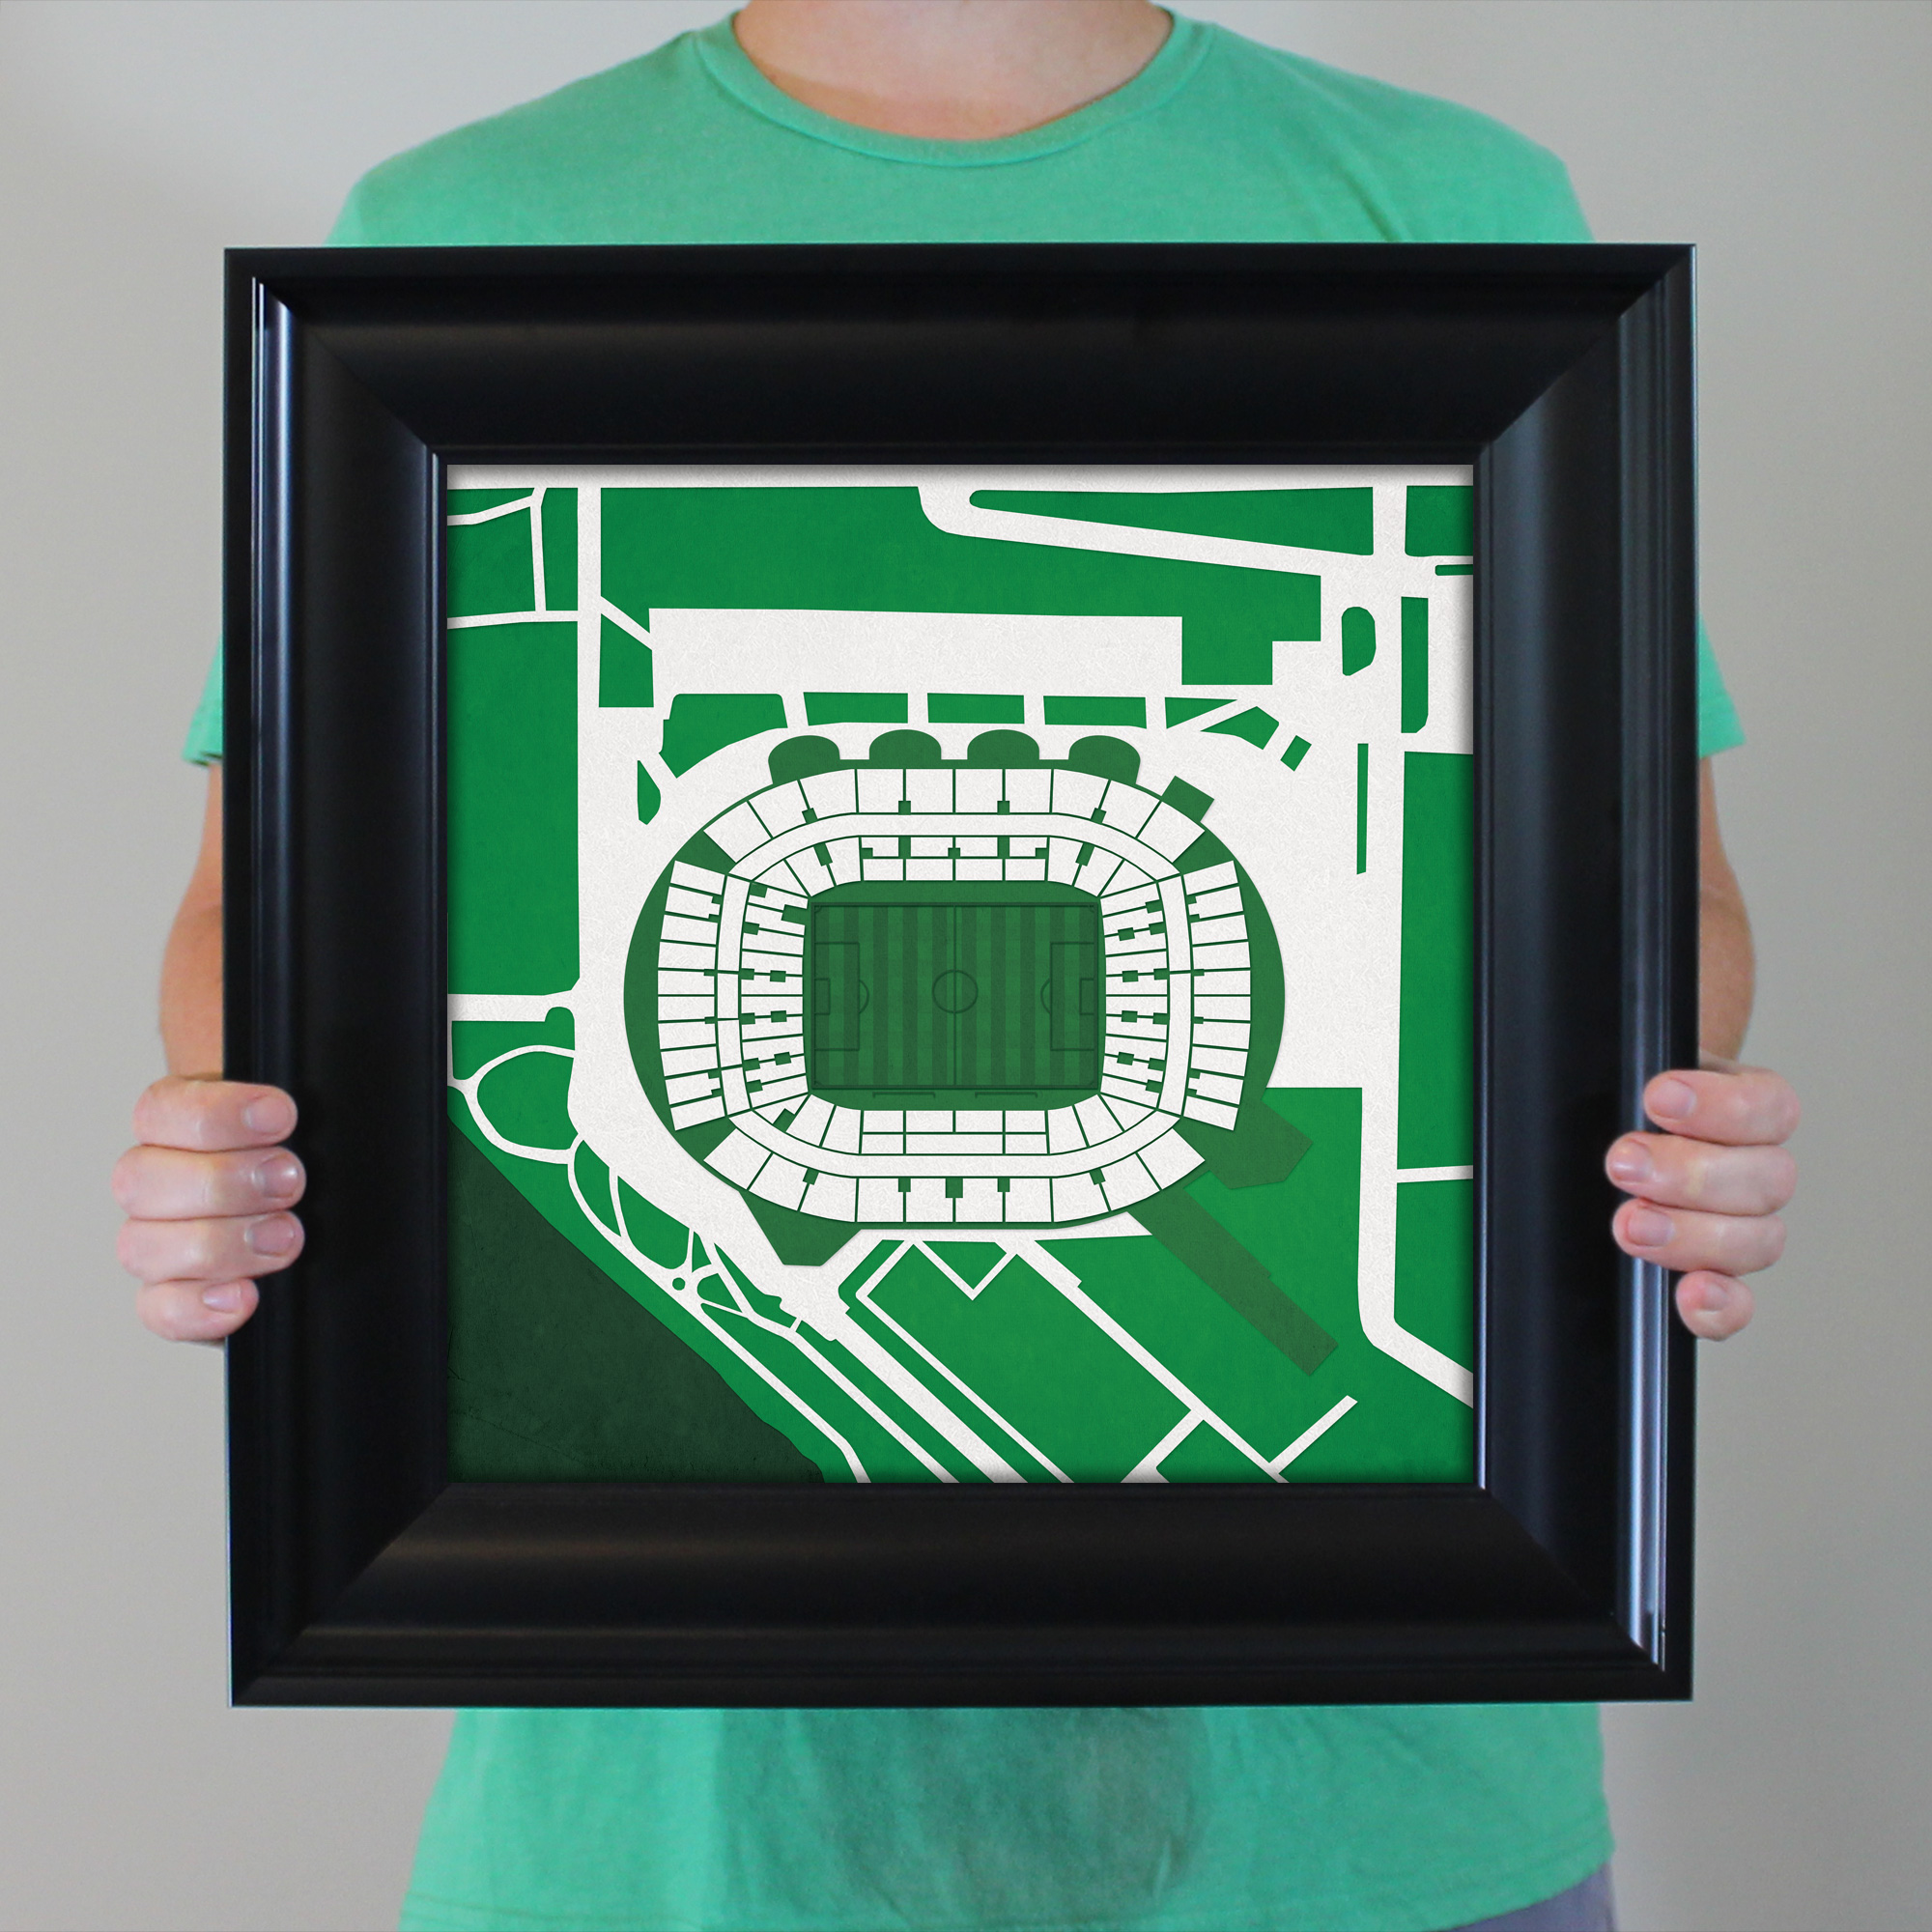 Weserstadion Map Art by City - The Map Shop Prints